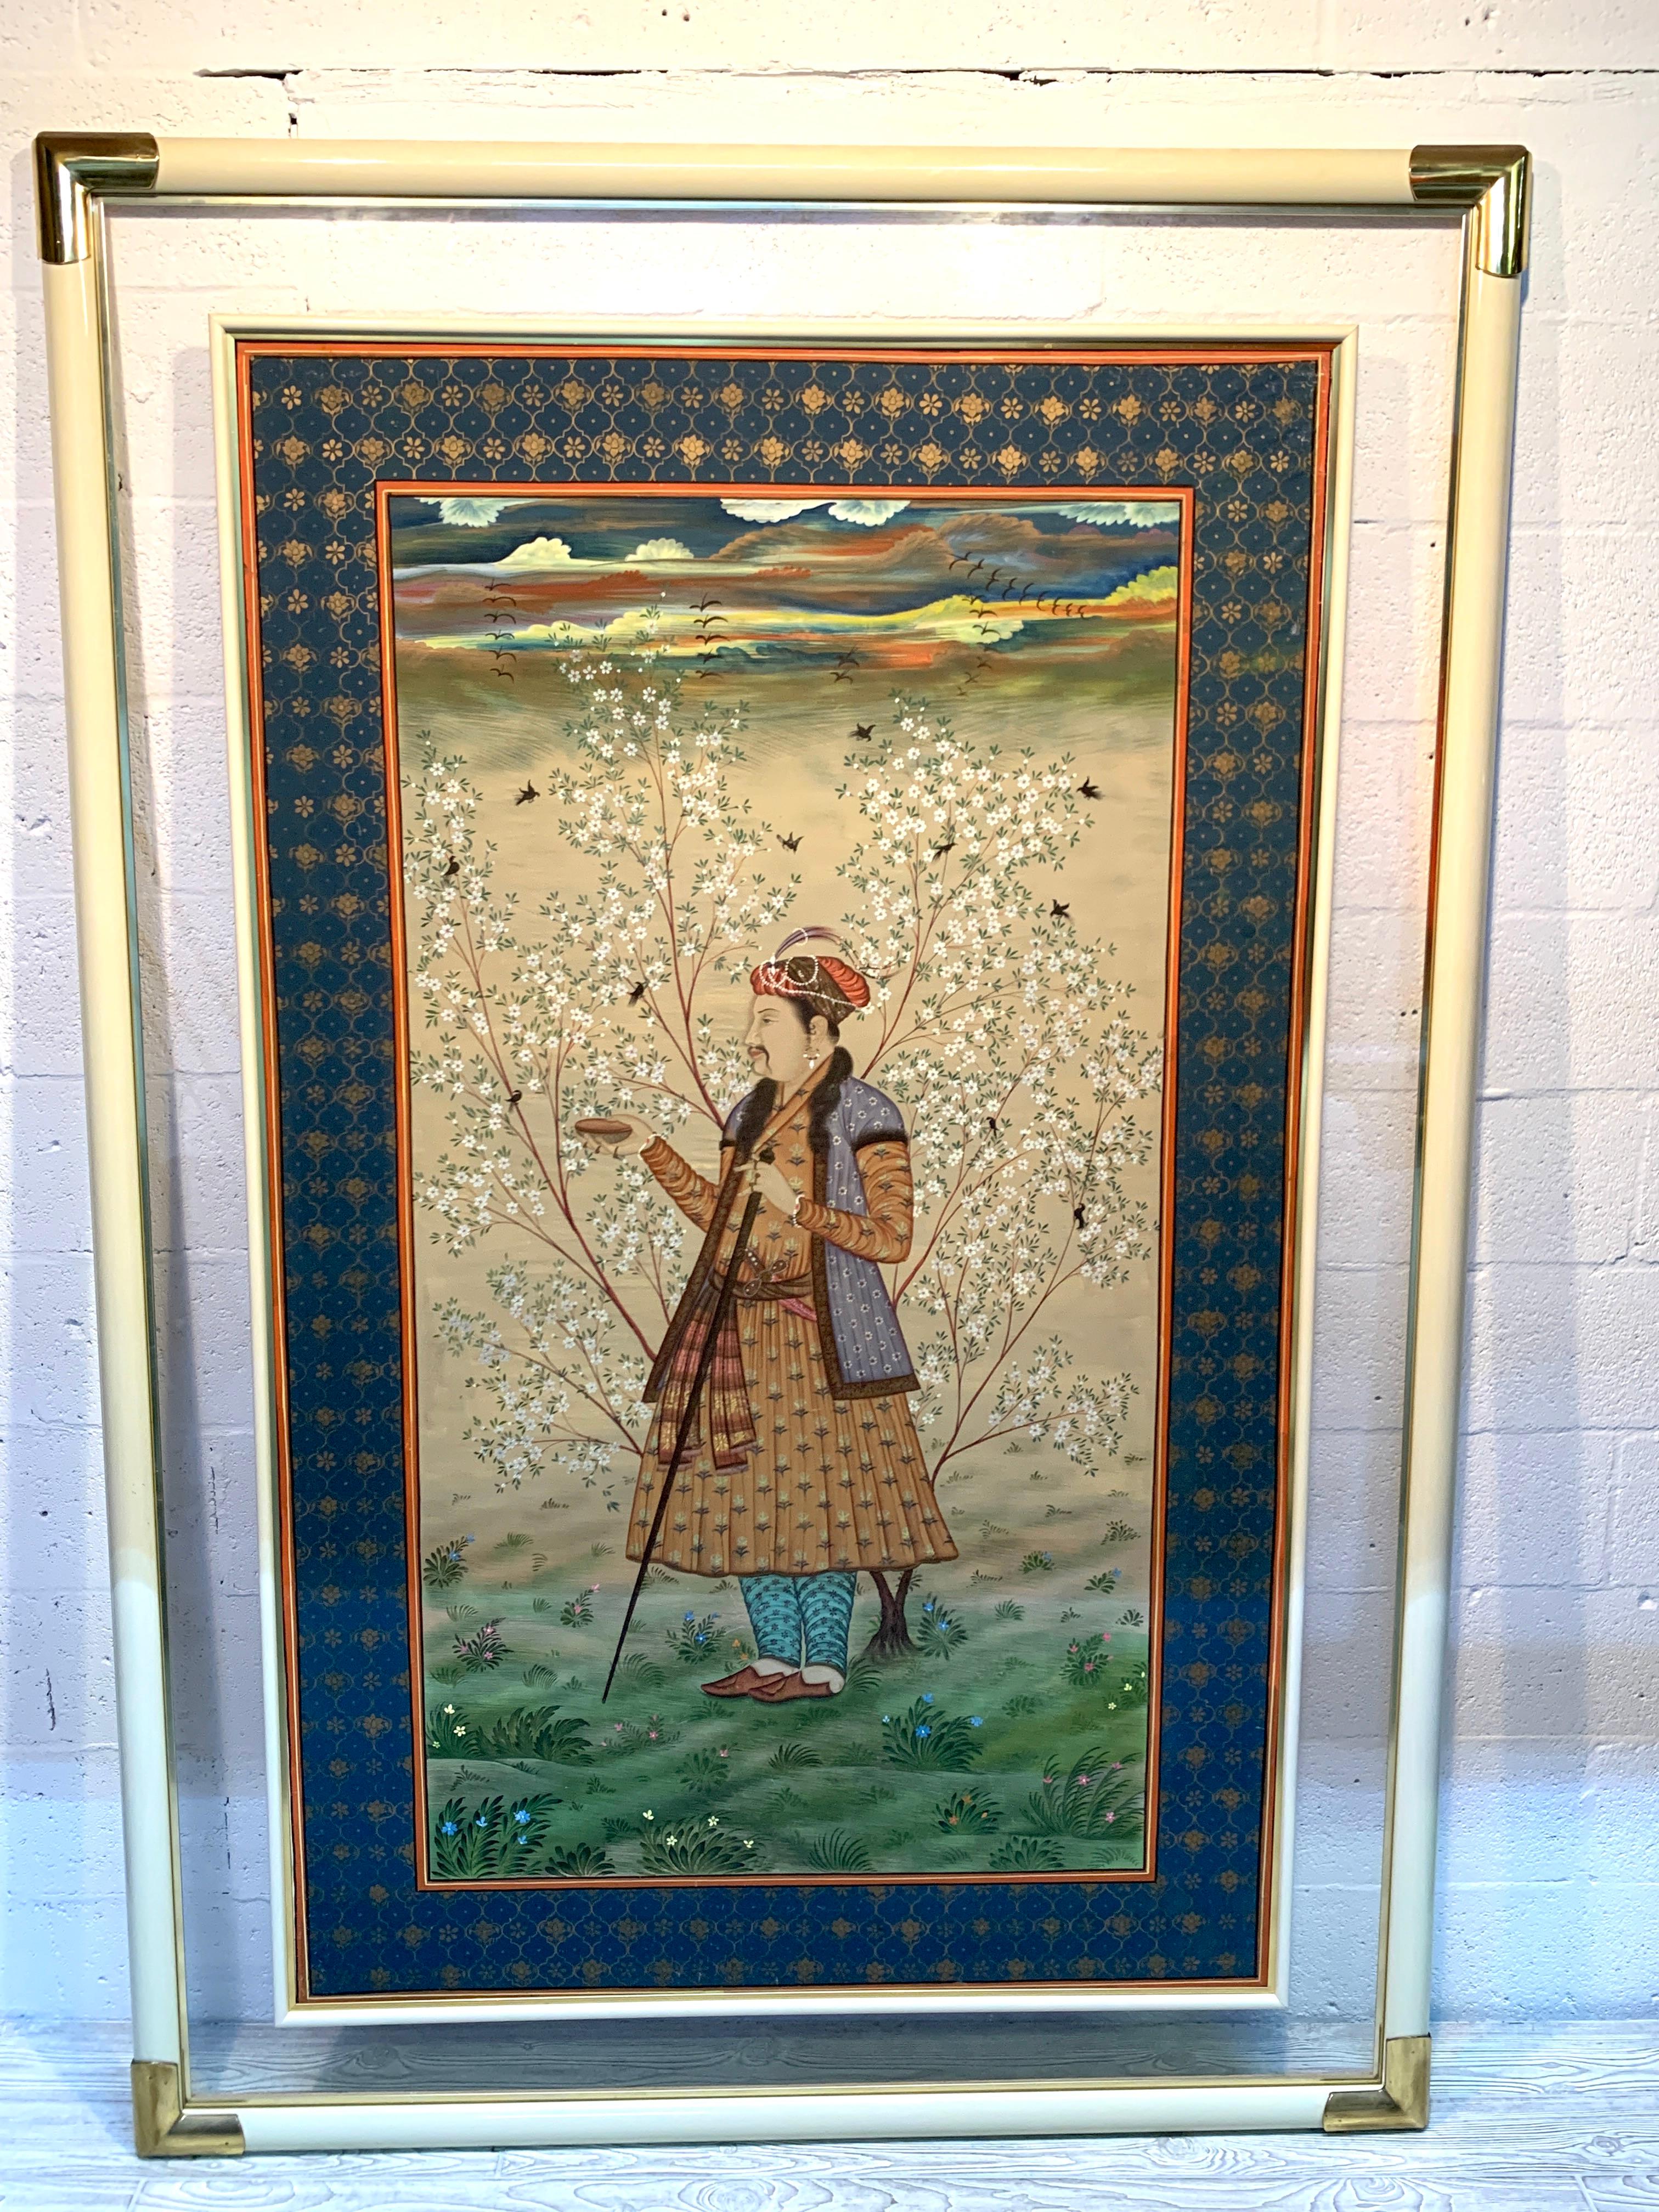 Monumental antique Provincial Mughal Portrait, in Lucite, brass and lacquered frame, a fine example of circa 1900 Classical Indian Court painting, depicting a prince in landscape with flowering tree with birds. Well proportioned margins with gilt